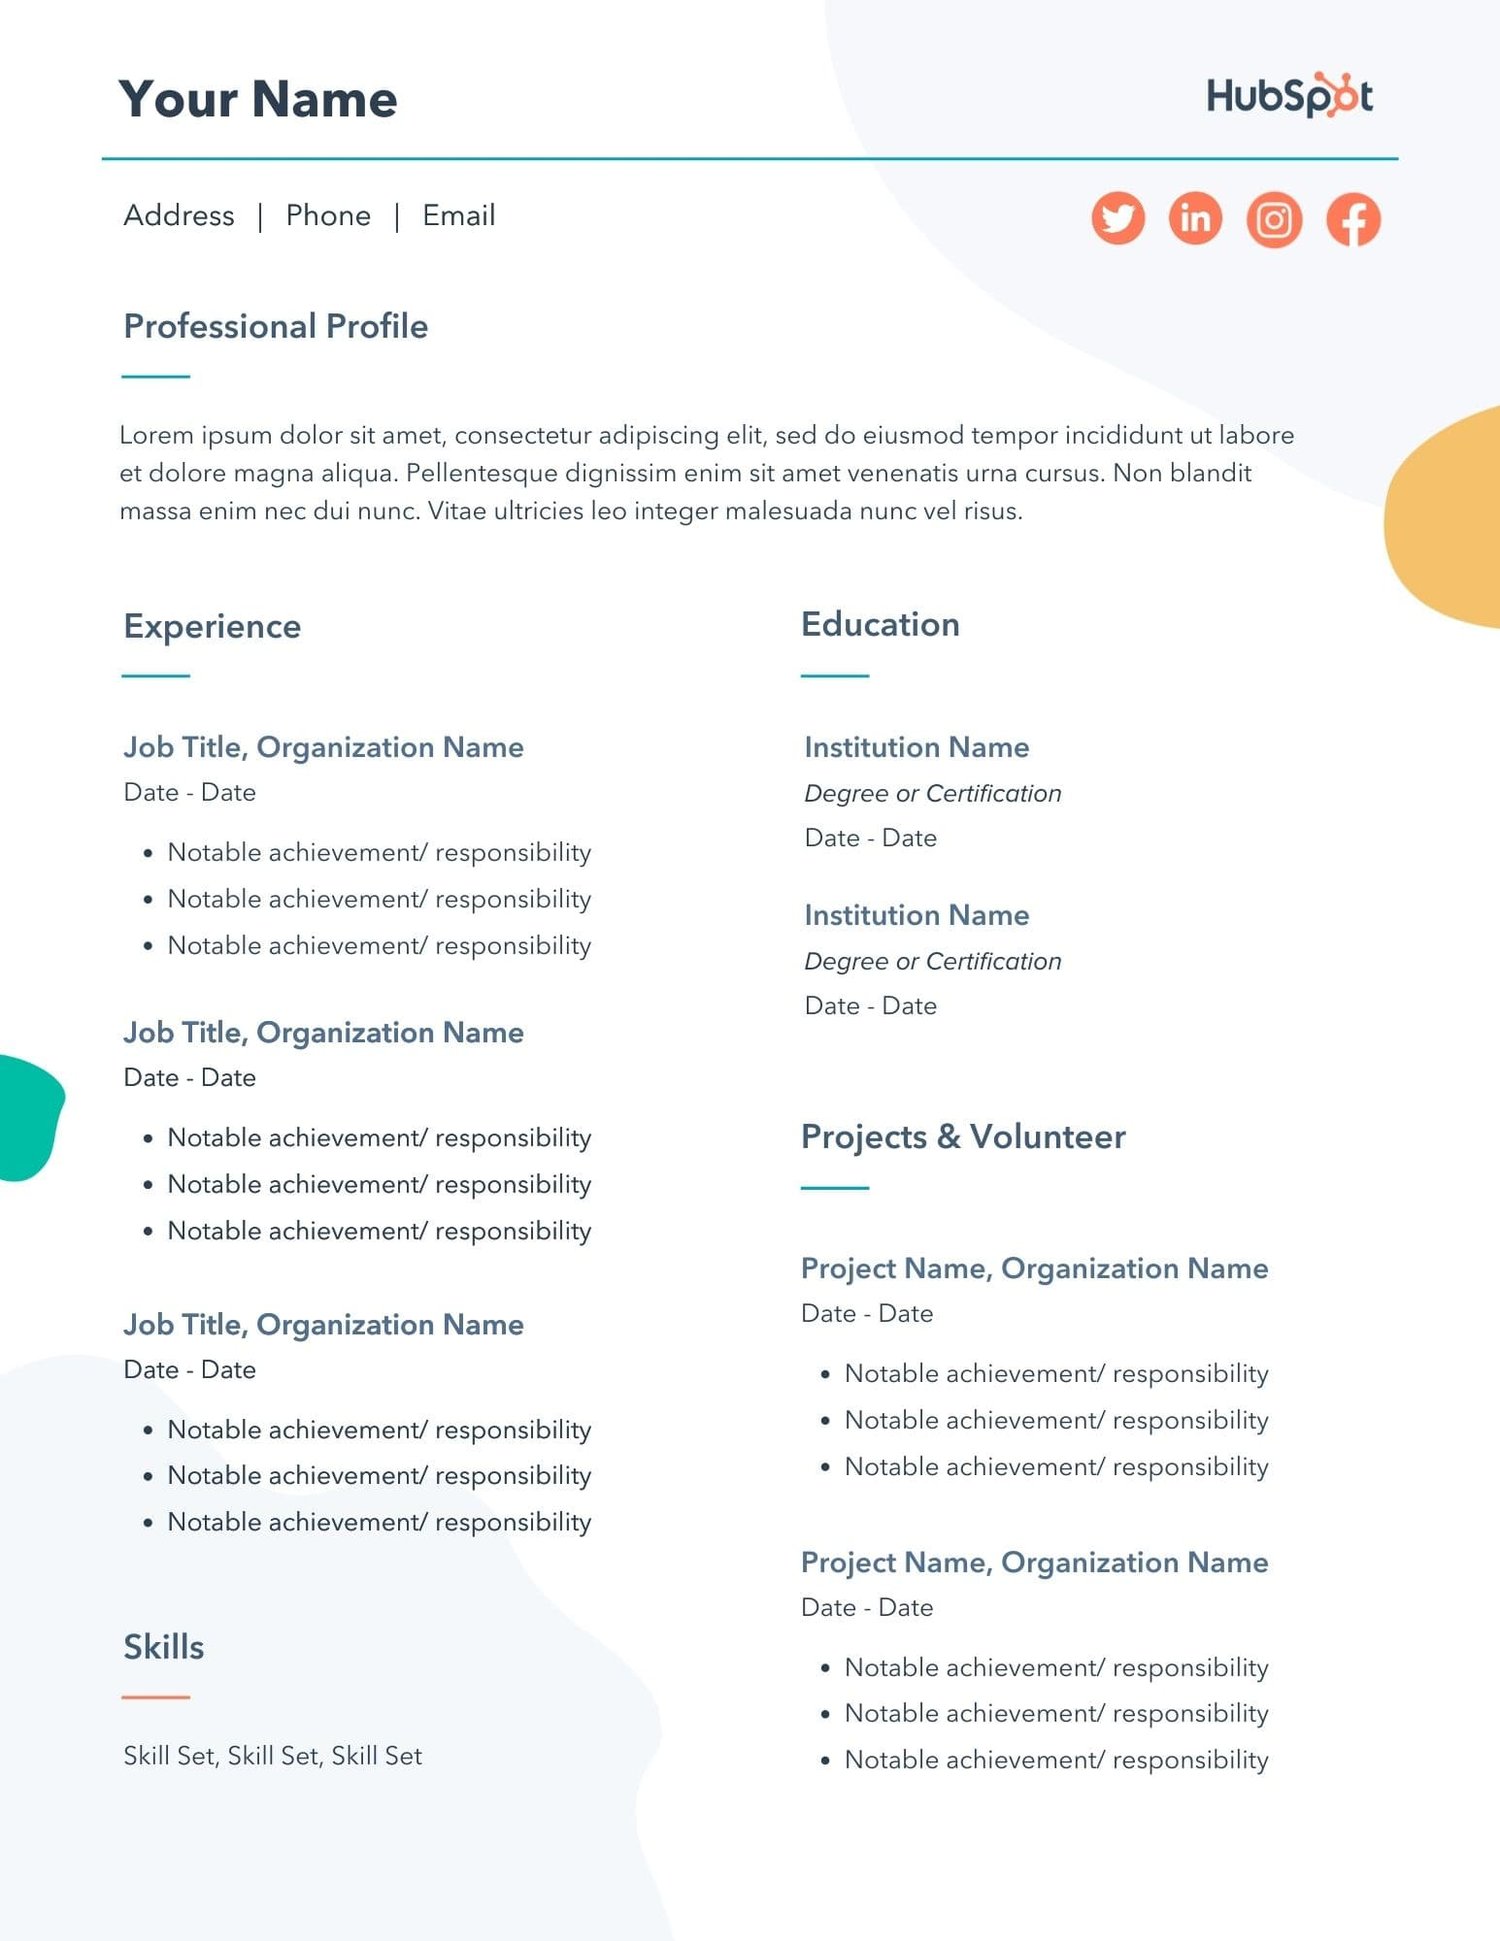 Best Resume Format For Experienced from blog.hubspot.com